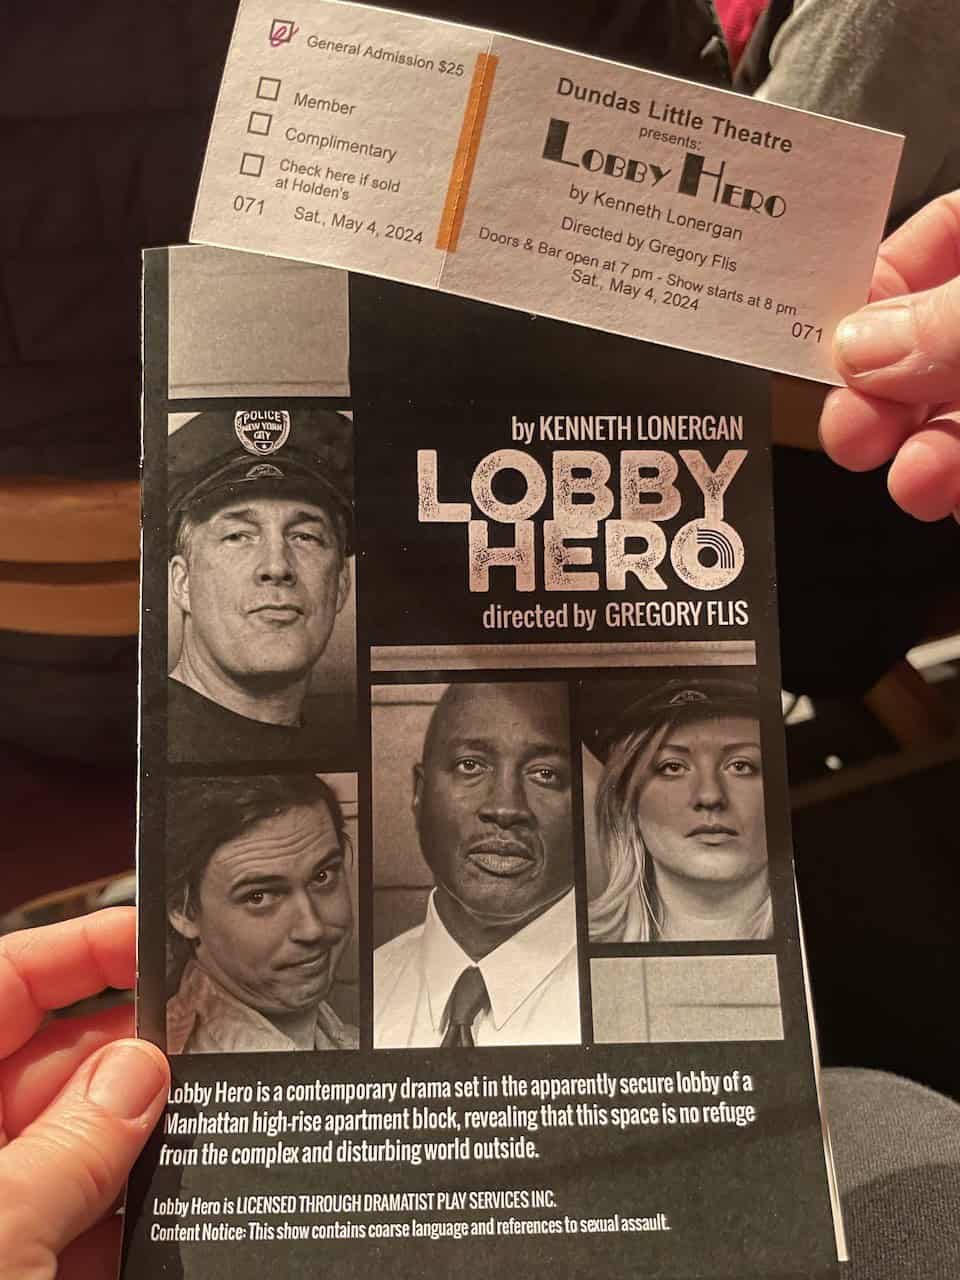 Dundas Little Theatre Show Ticket and Program - We purchased our tickets ahead of time and were given a program as we entered the theatre. The talented cast of Lobby Hero put on a great show at the Dundas Little Theatre in Dundas, Ontario, Canada.